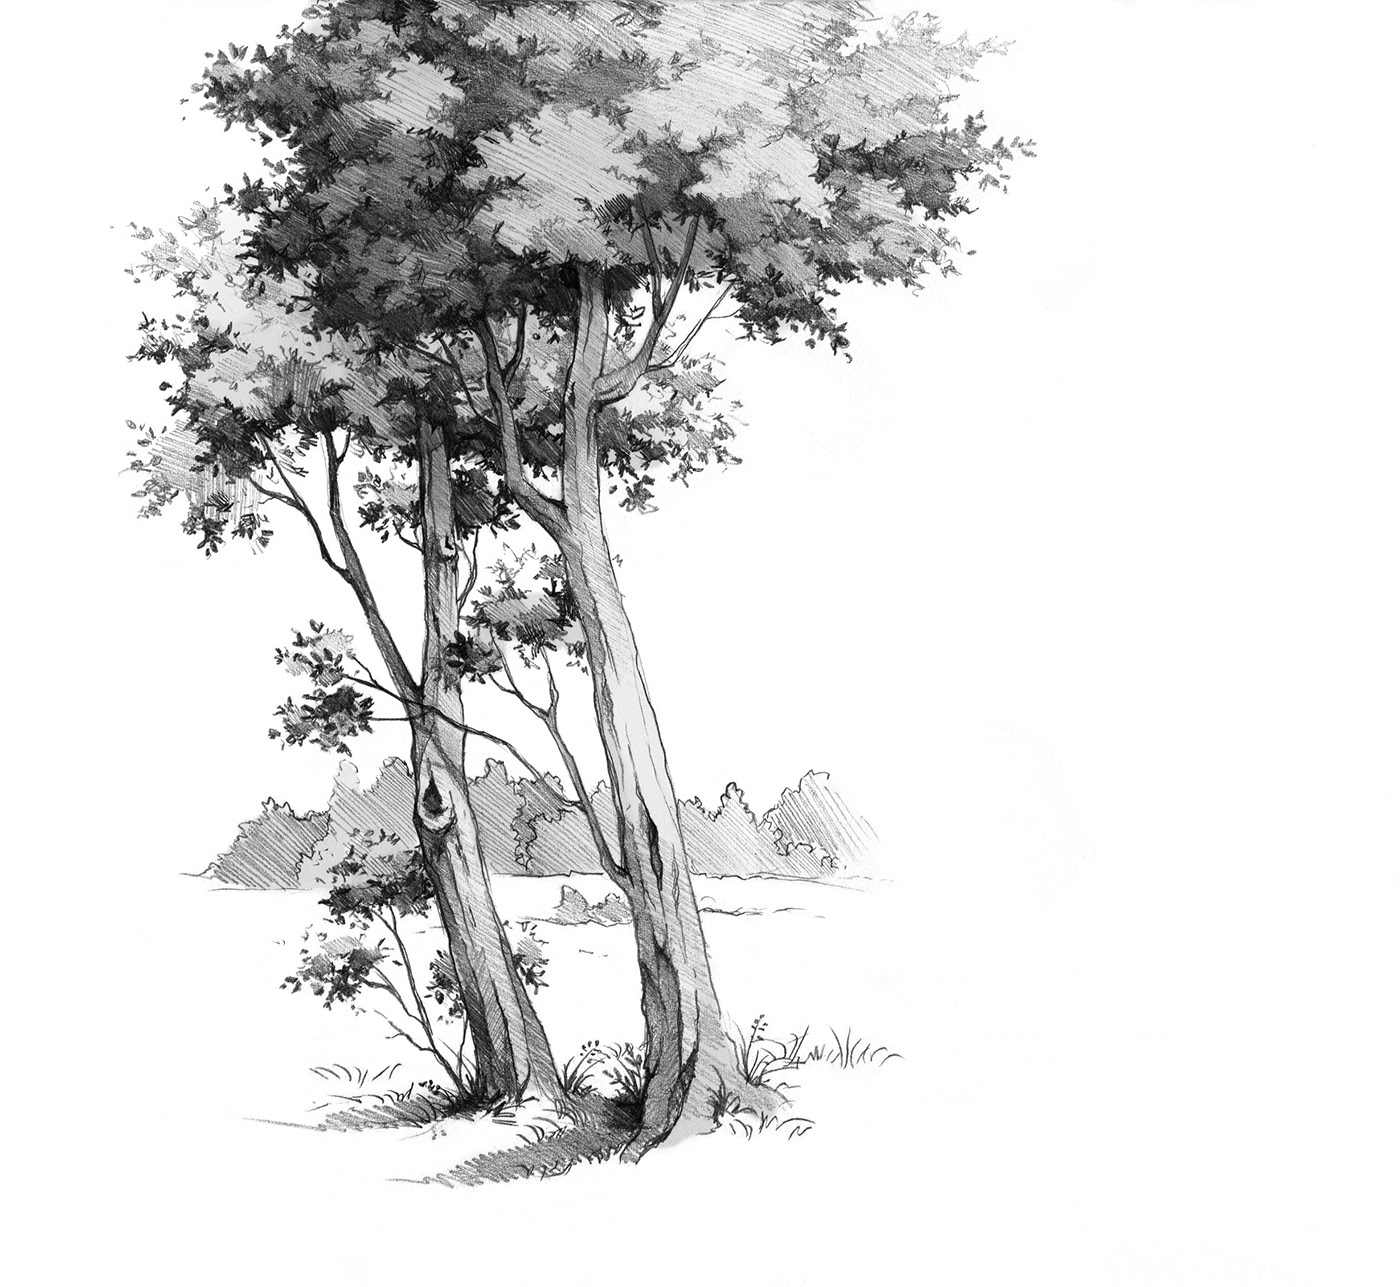  drawing trees in pencil on Behance